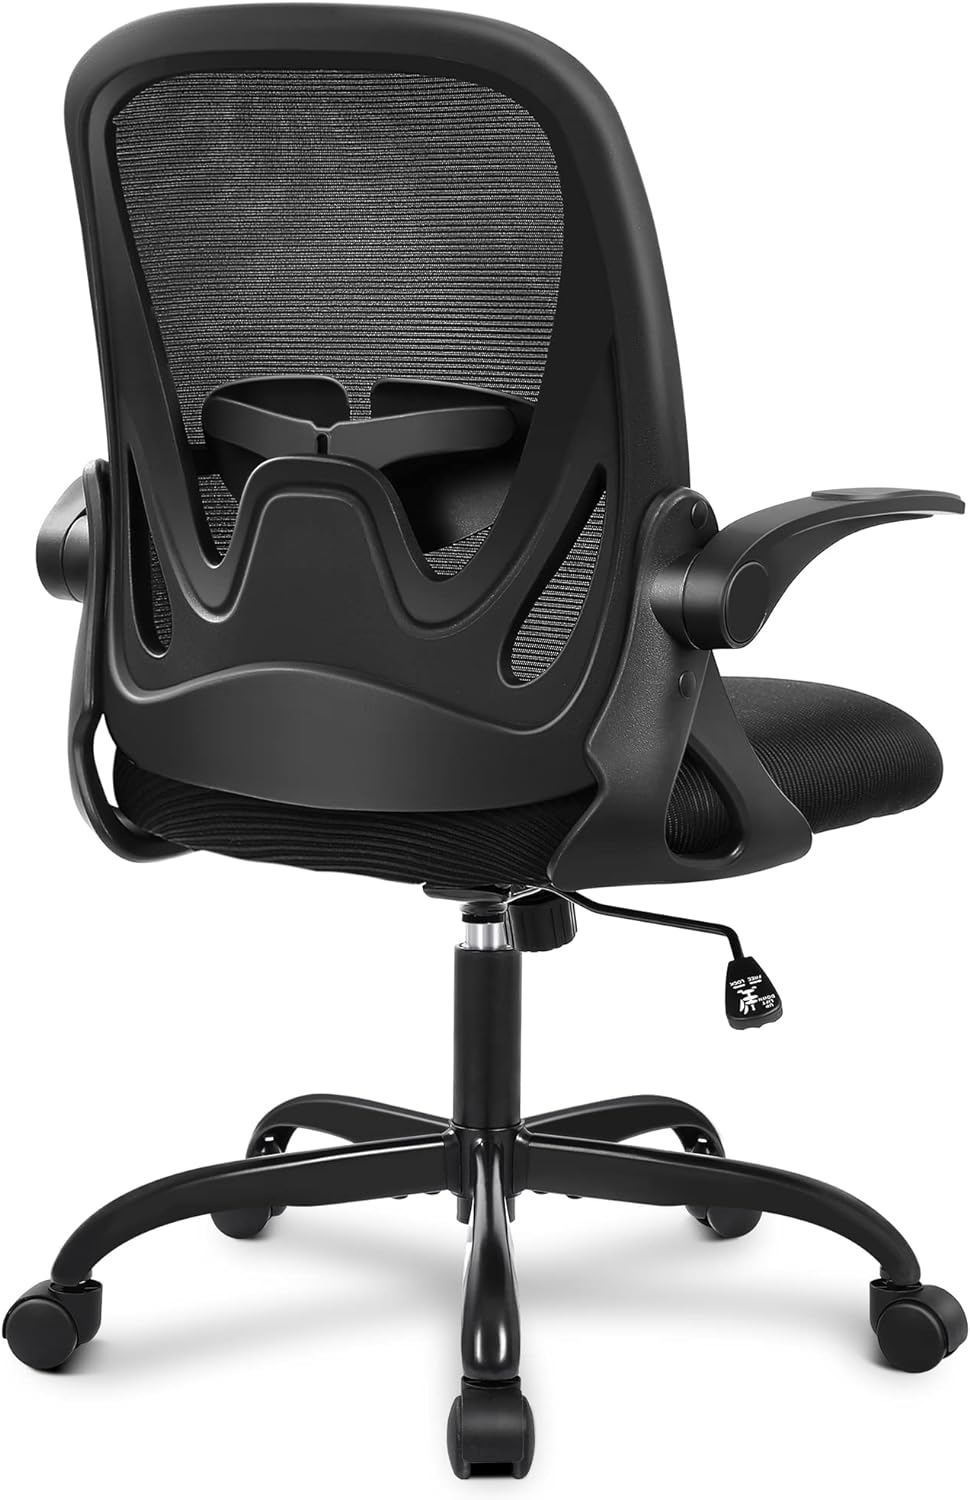 Primy Office Ergonomic Desk Chair with Adjustable Lumbar Support and Height, Swivel Breathable Mesh Computer Chair with Flip up Armrests for Conference Room (Black)